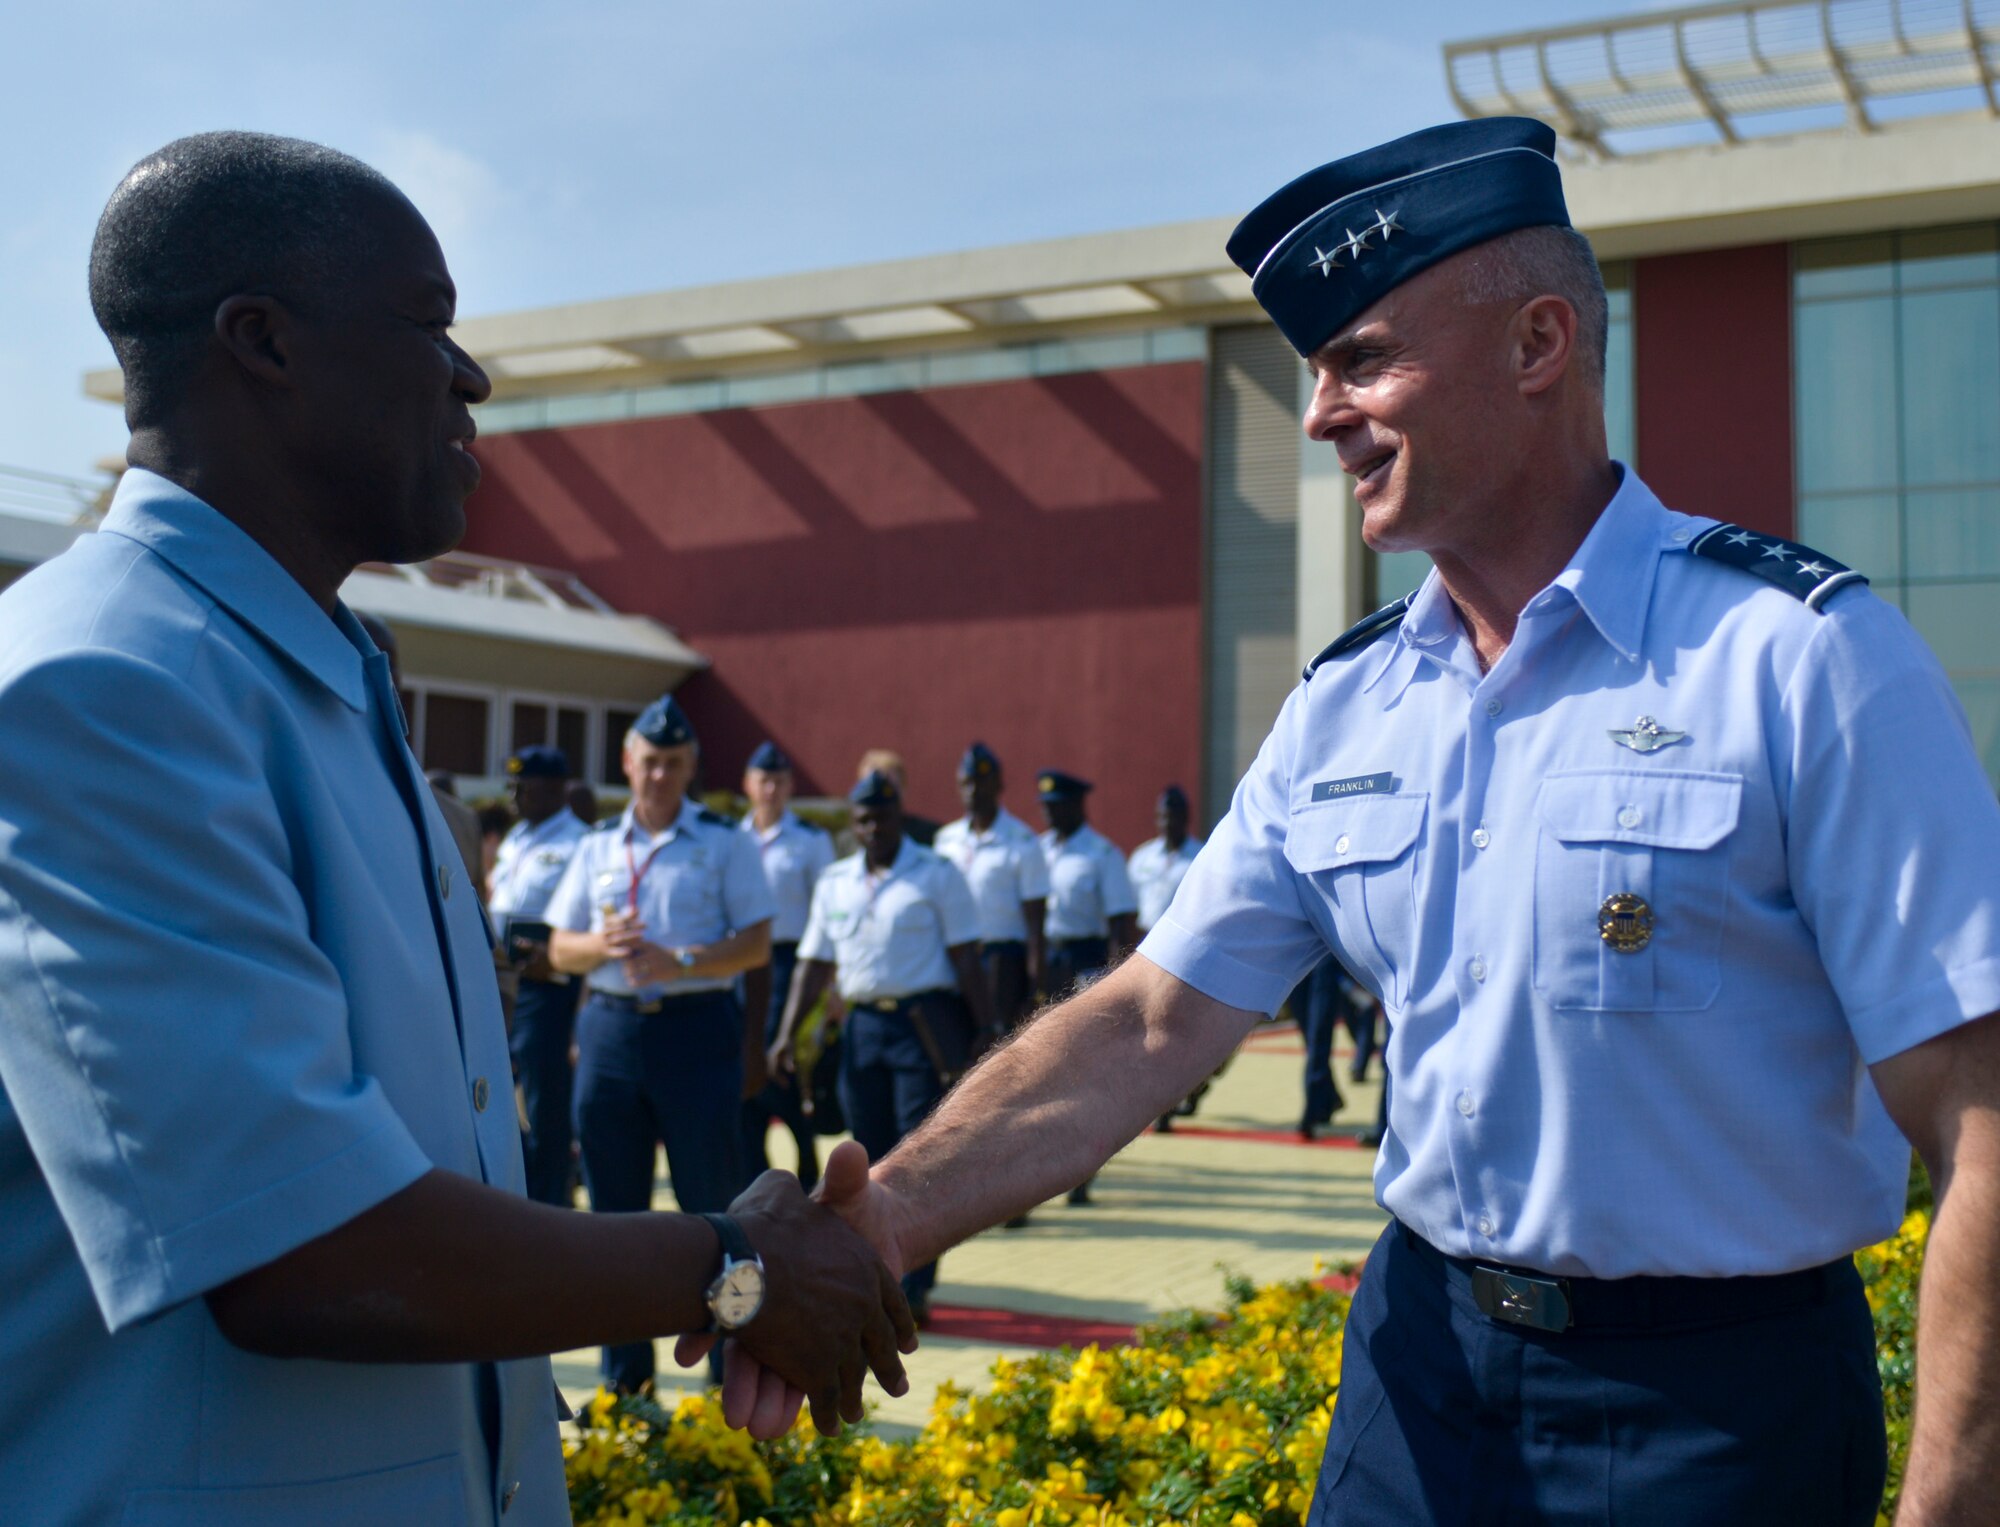 Lt. Gen. Craig A. Franklin, 3rd Air Force commander, shakes hands with Ghanaian vice president Kwesi Amissah-Arthur after their meeting with 10 African air chiefs, Aug. 21, 2013, Accra, Ghana. Franklin and the air chiefs spent three days discussing various ways the air chiefs could collaborate air power resources to address regional challenges during the Regional African Air Chiefs Symposium hosted in Accra. (U.S. Air Force photo by Airman 1st Class Jordan Castelan/Released)